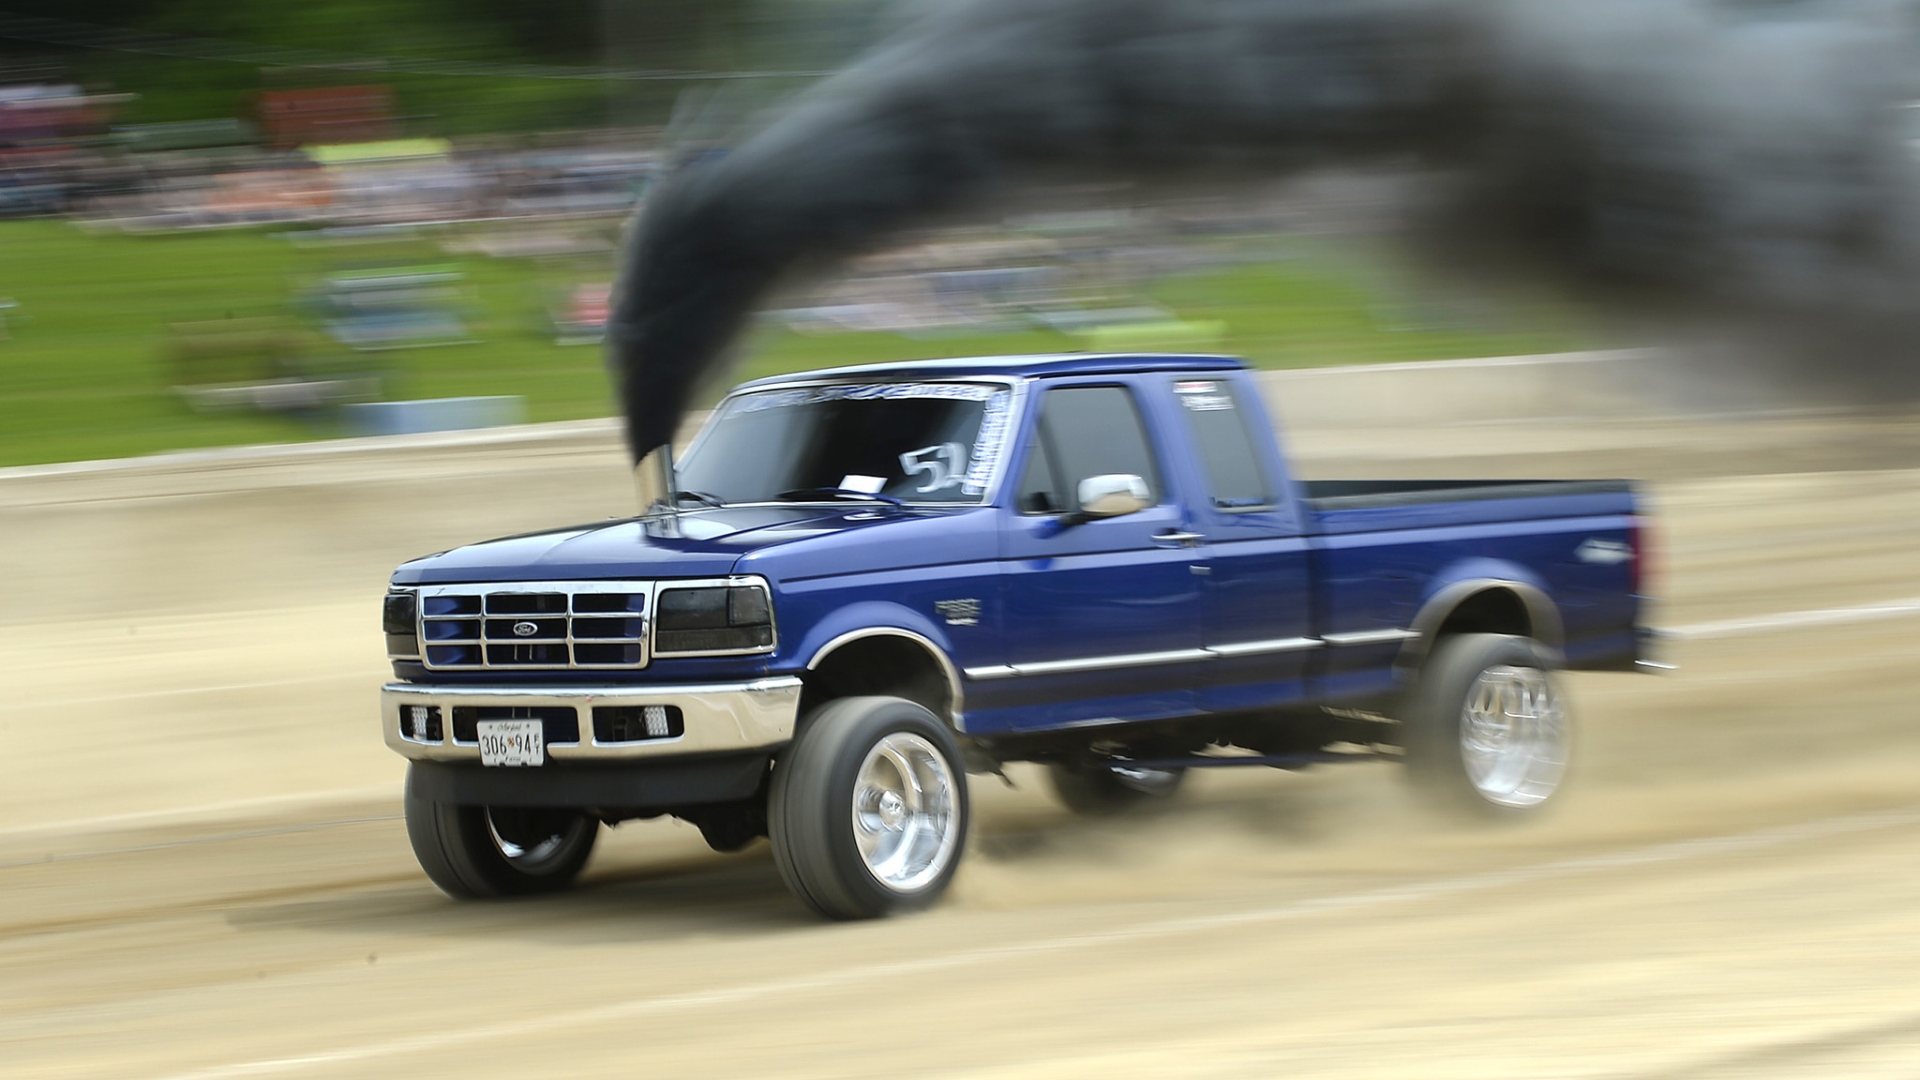 Trucks Face Off At Annual Buckwild Truck And Tractor Classic